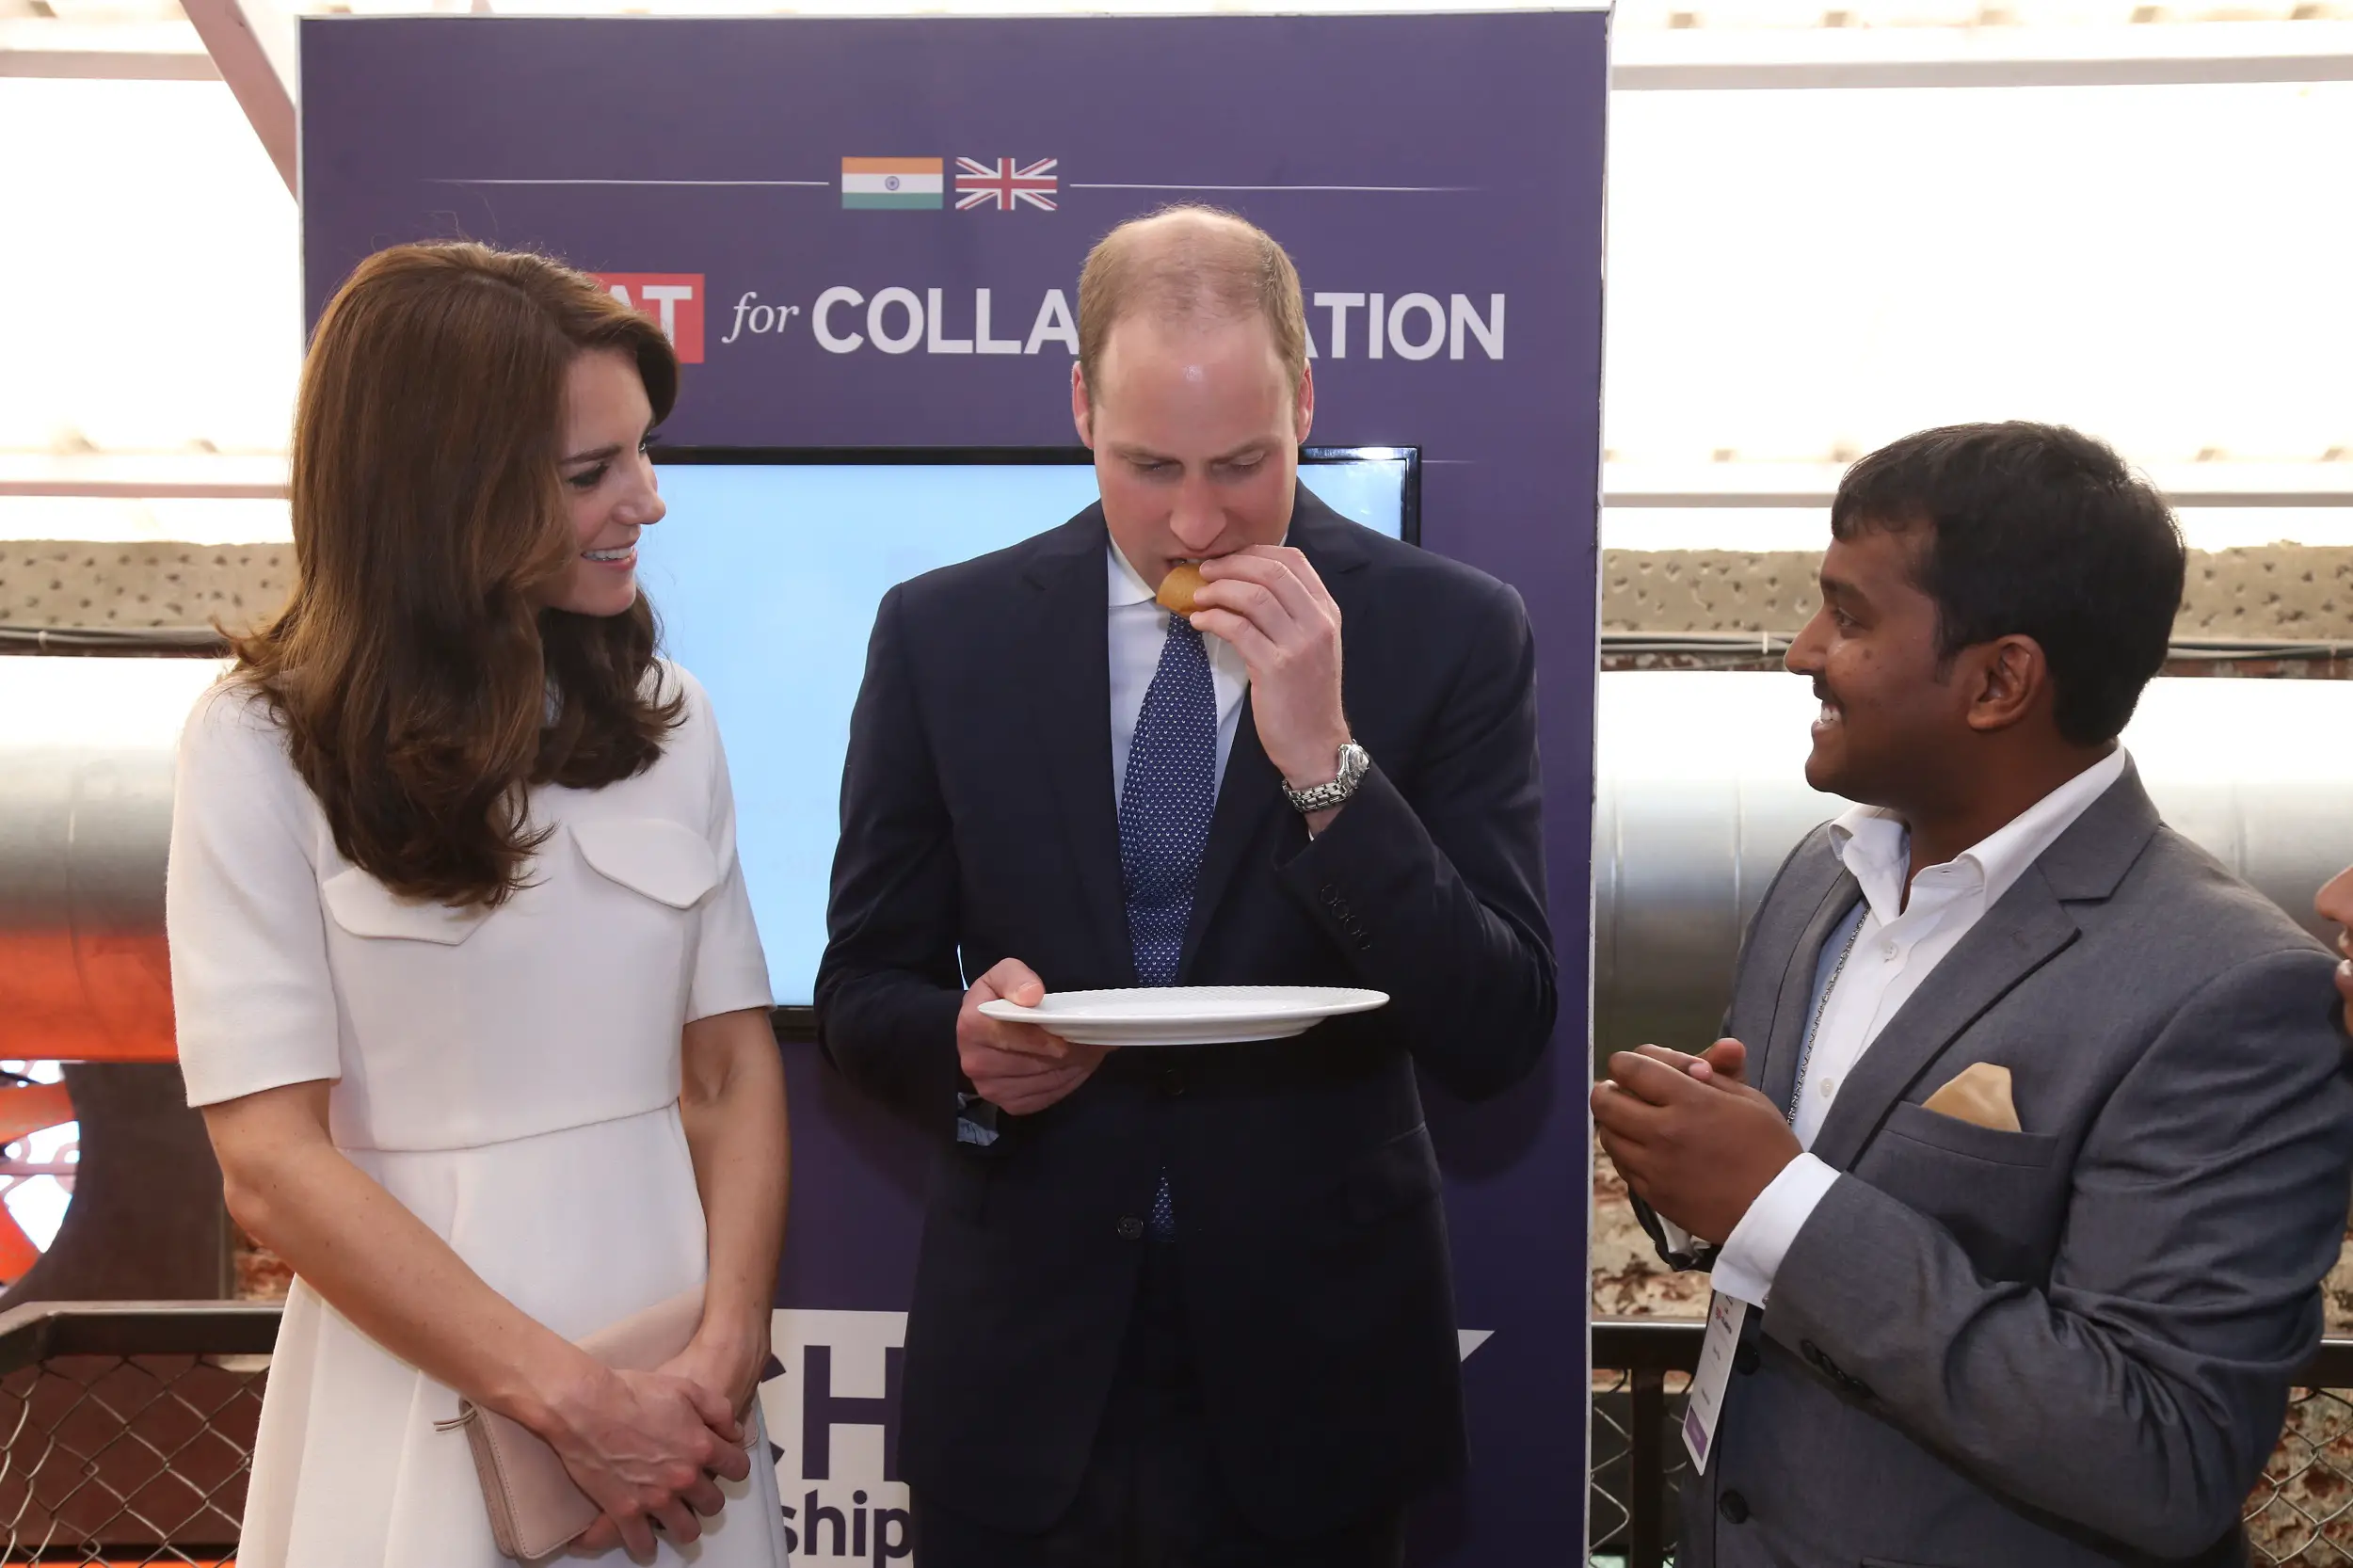 William tasted the dosa while Catherine politely declined the offer.